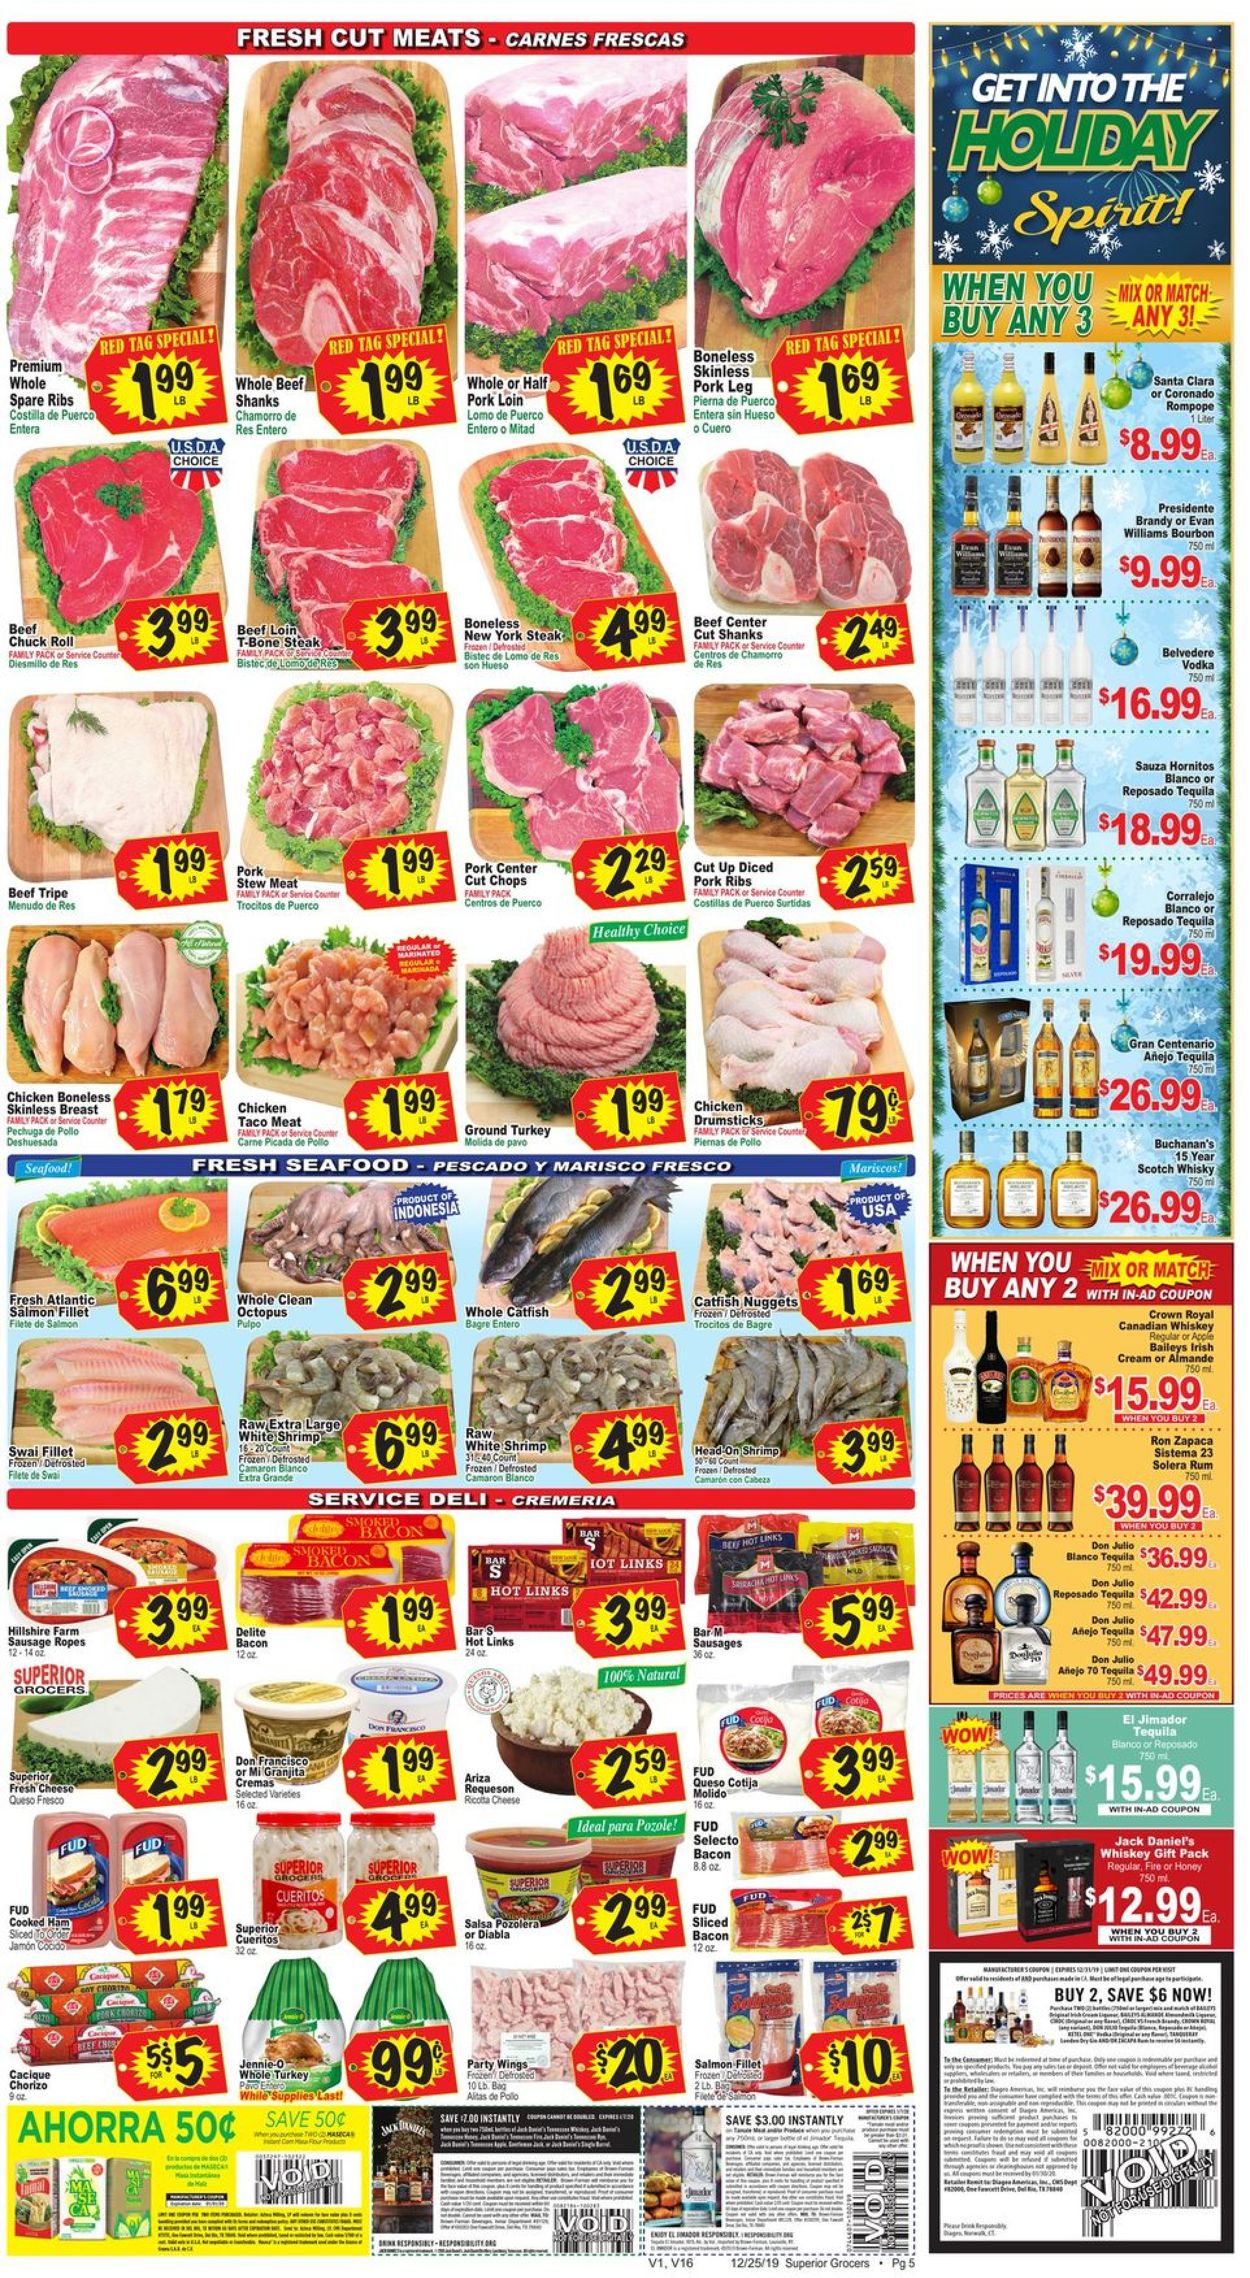 Superior Grocers - New Year's Ad 2019/2020 Weekly Ad Circular - valid 12/25-01/01/2020 (Page 5)